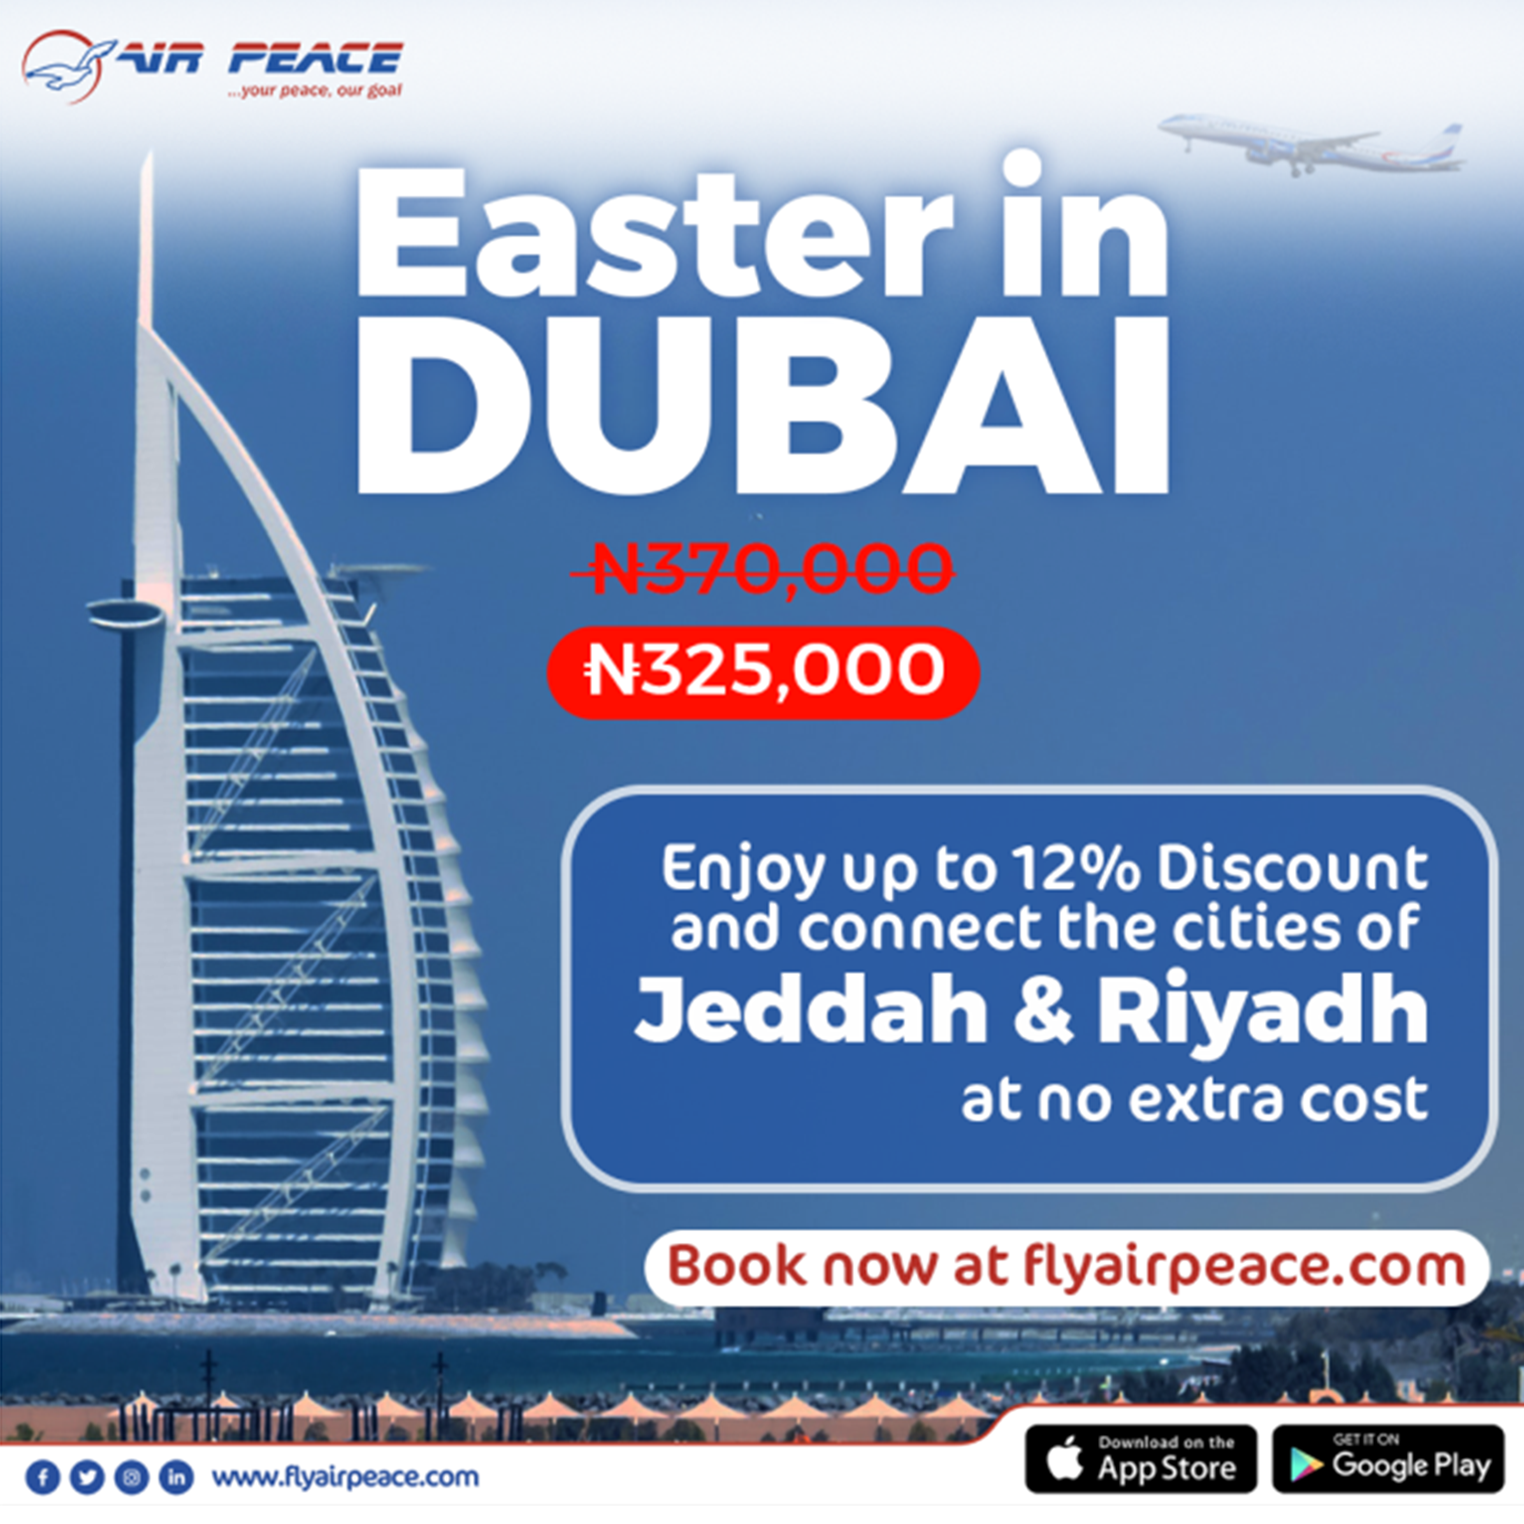 AIRPEACE_IMAGE